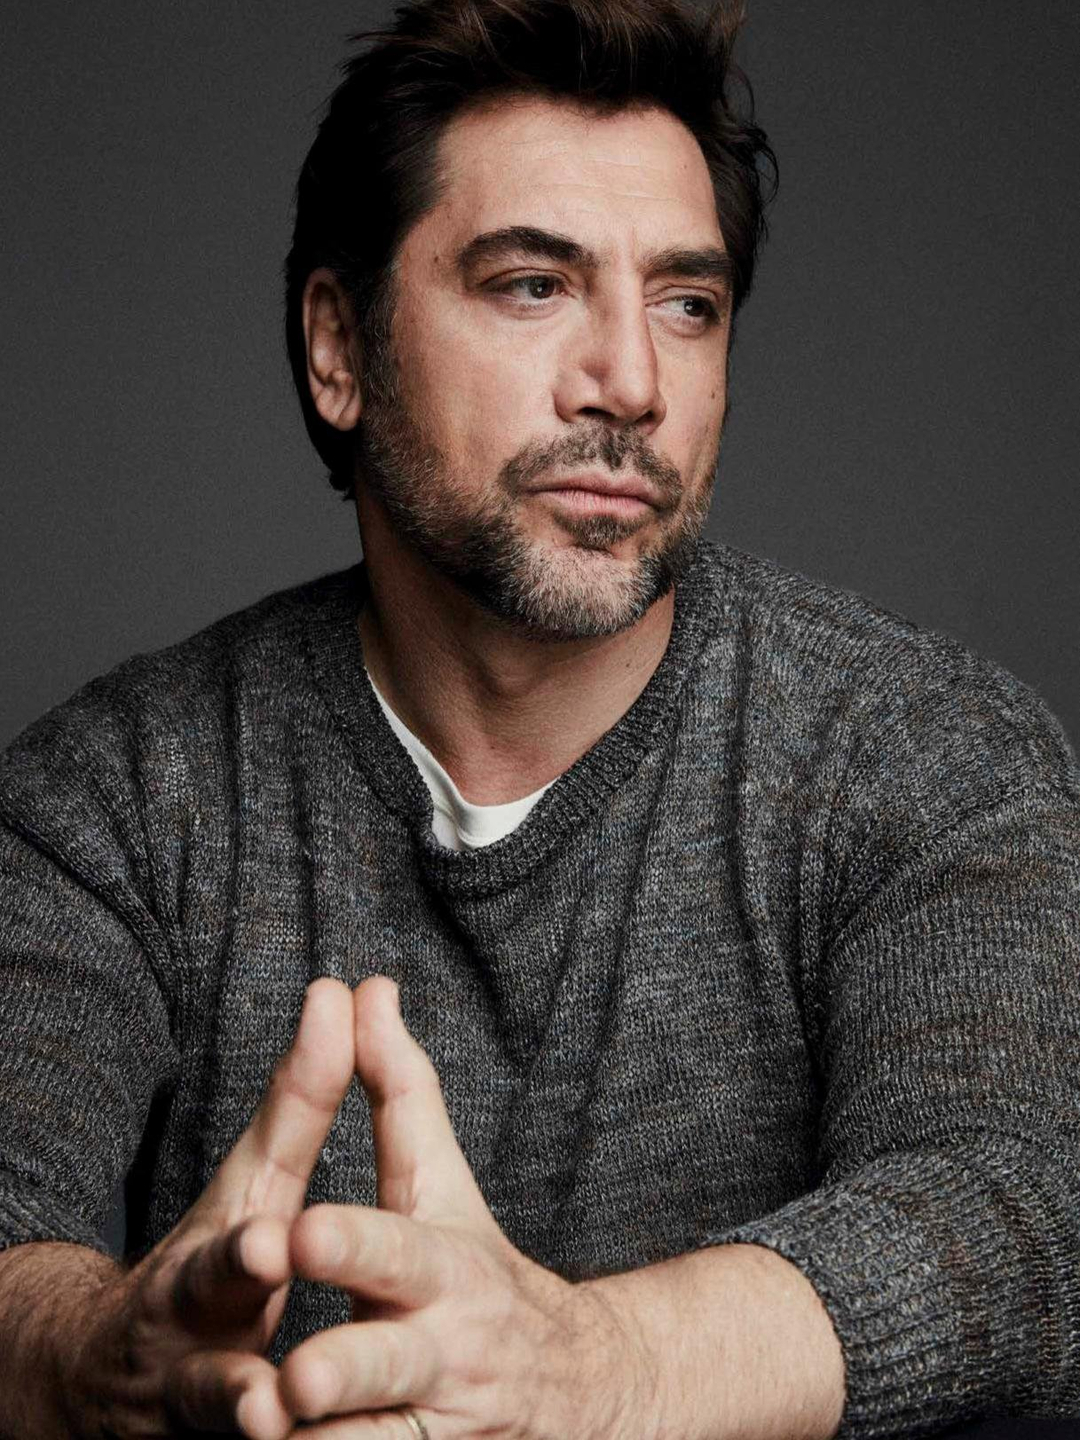 Javier Bardem does he have a wife